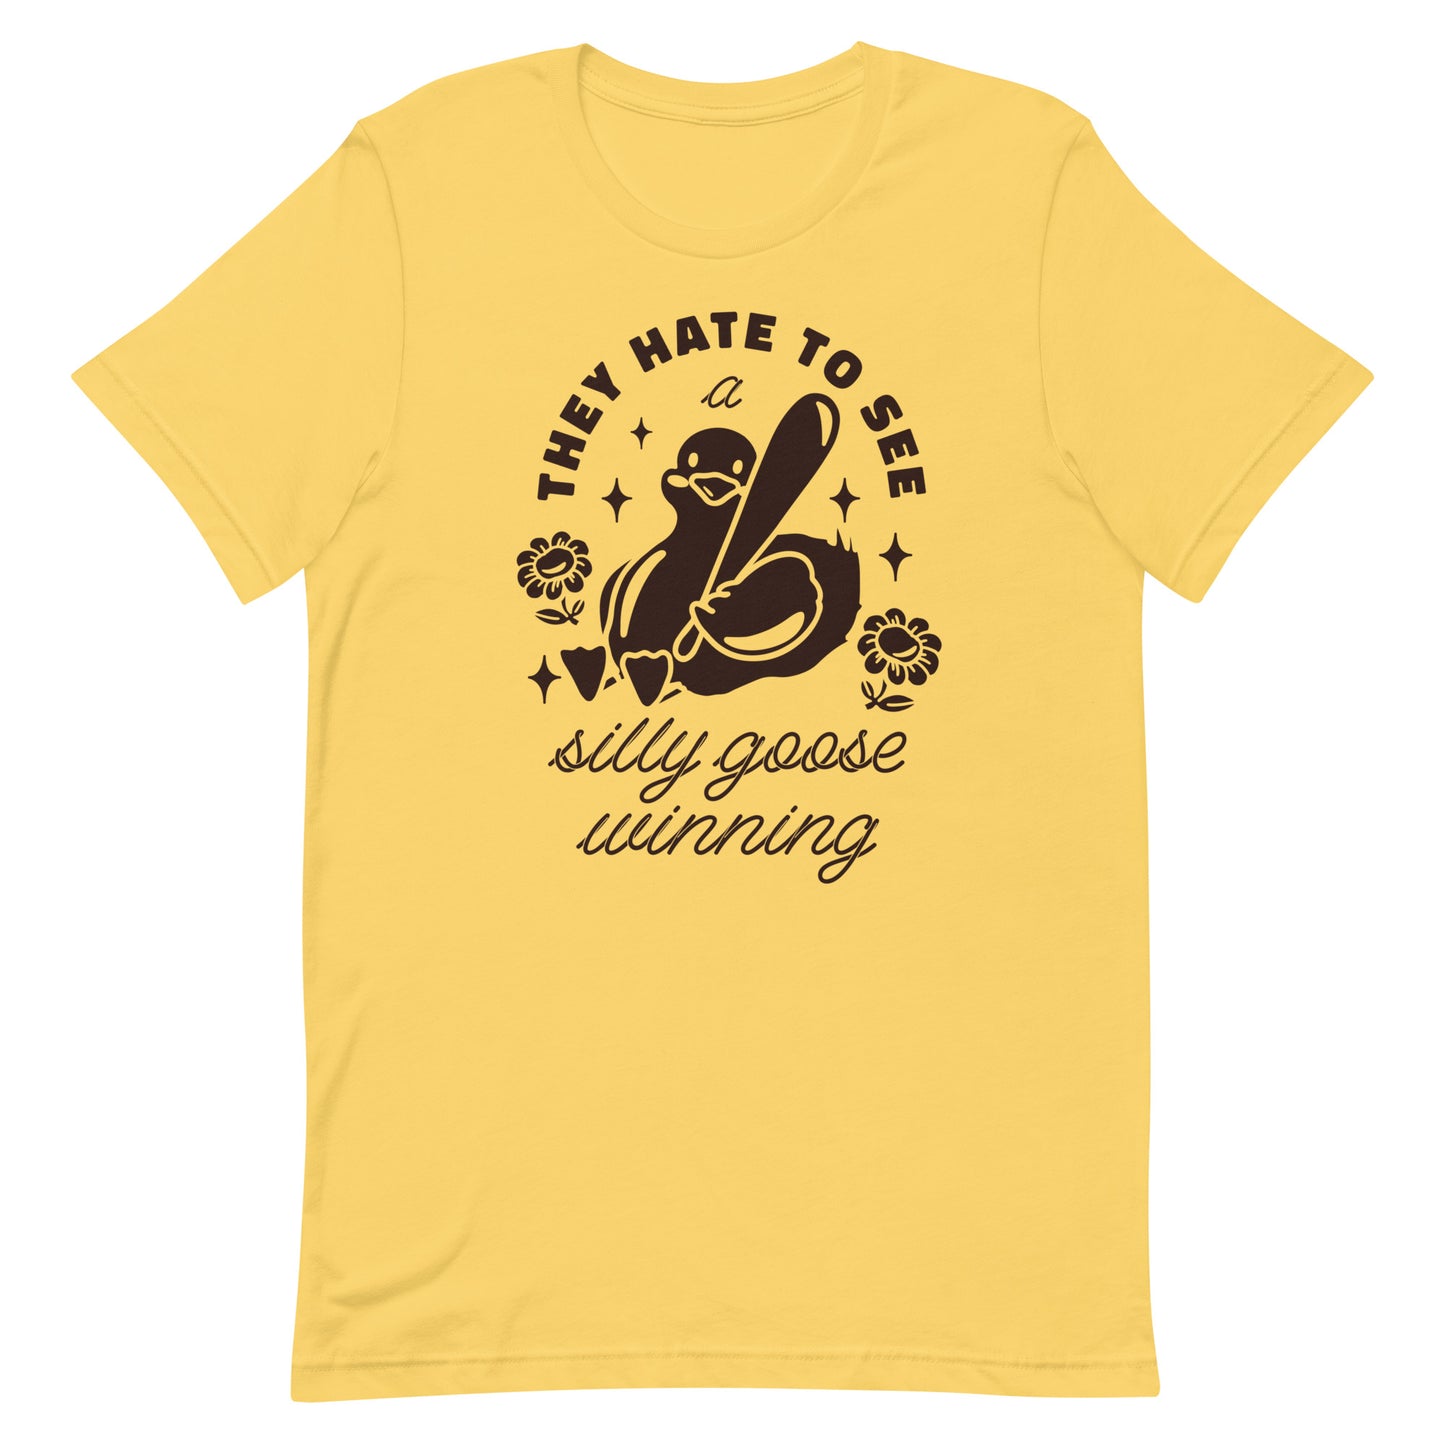 They Hate To See a Silly Goose Winning Unisex t-shirt